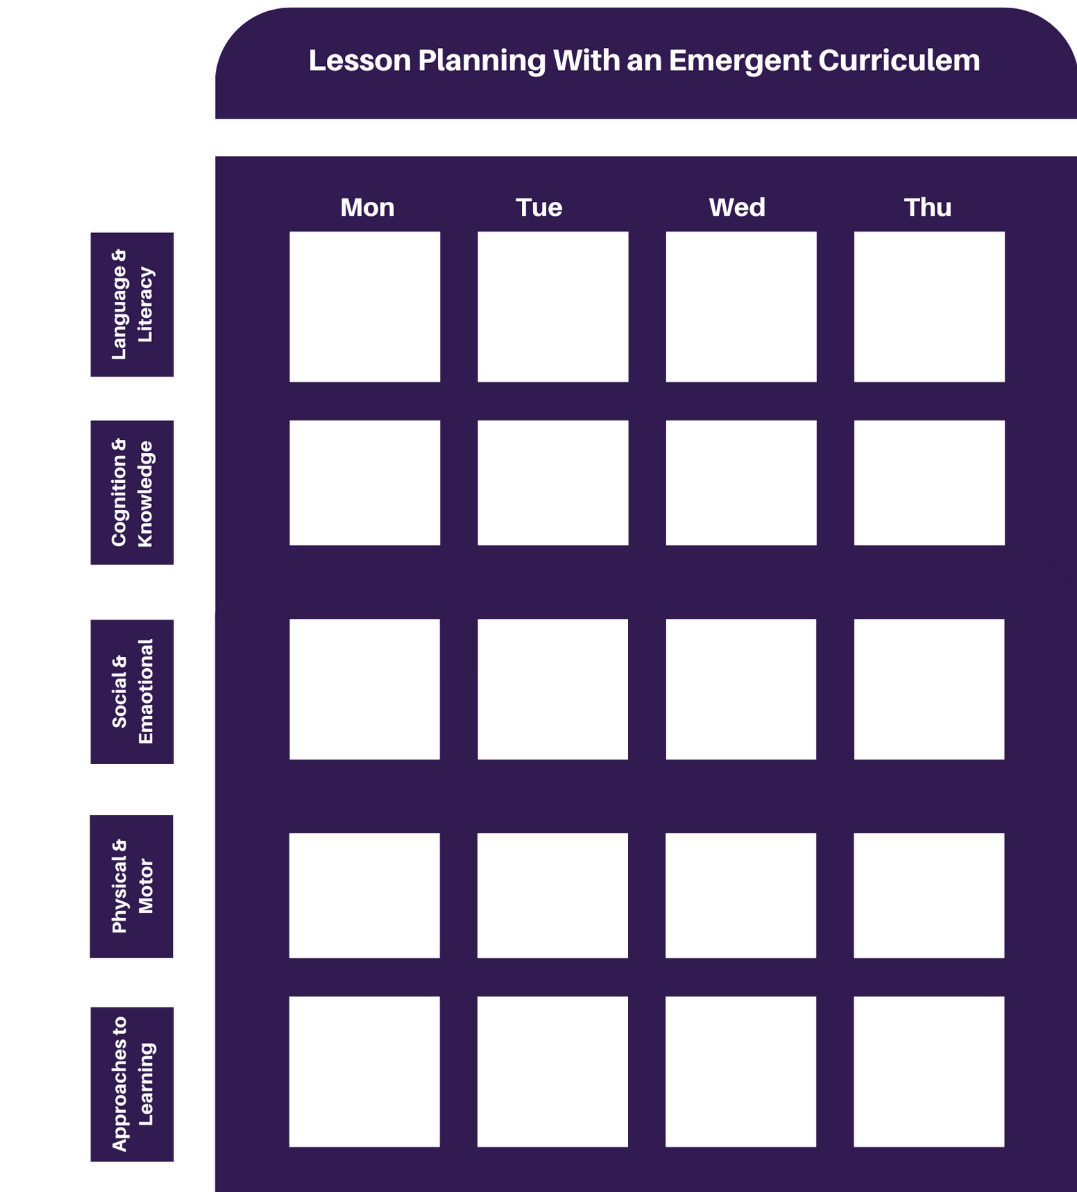 Lesson plan icon detailing an emergent curriculum approach. Emergent curriculum means that teachers thoughtfully plan the environment, offering many visible choices, based on the children's skills